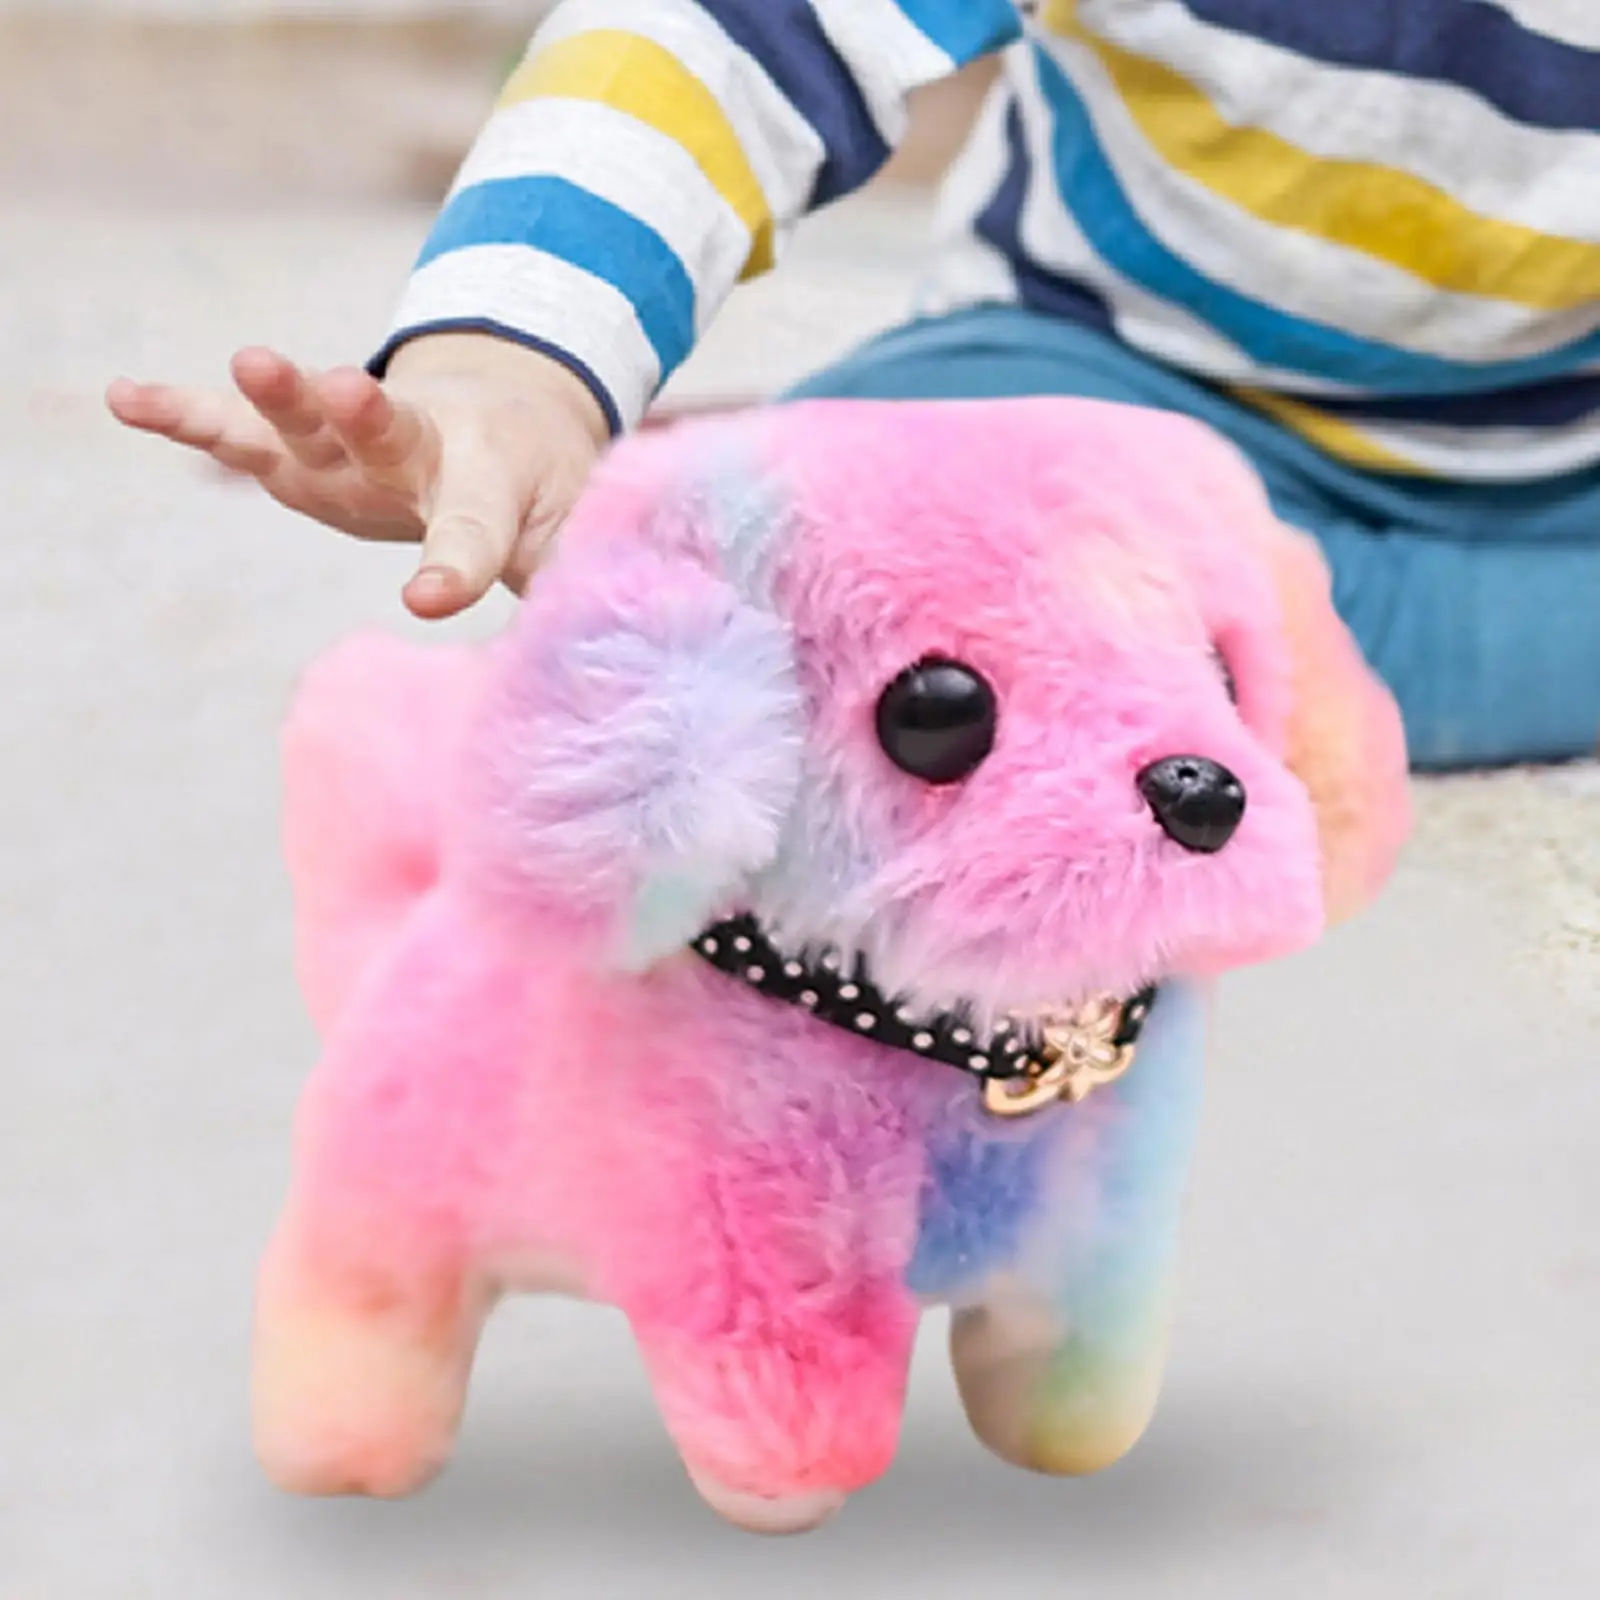 Interactive Electronic Pet Lifelike Educational Cute with Sound Plush Toy for Kids Toys Bedtime Friend New Year Gifts Boys Girls